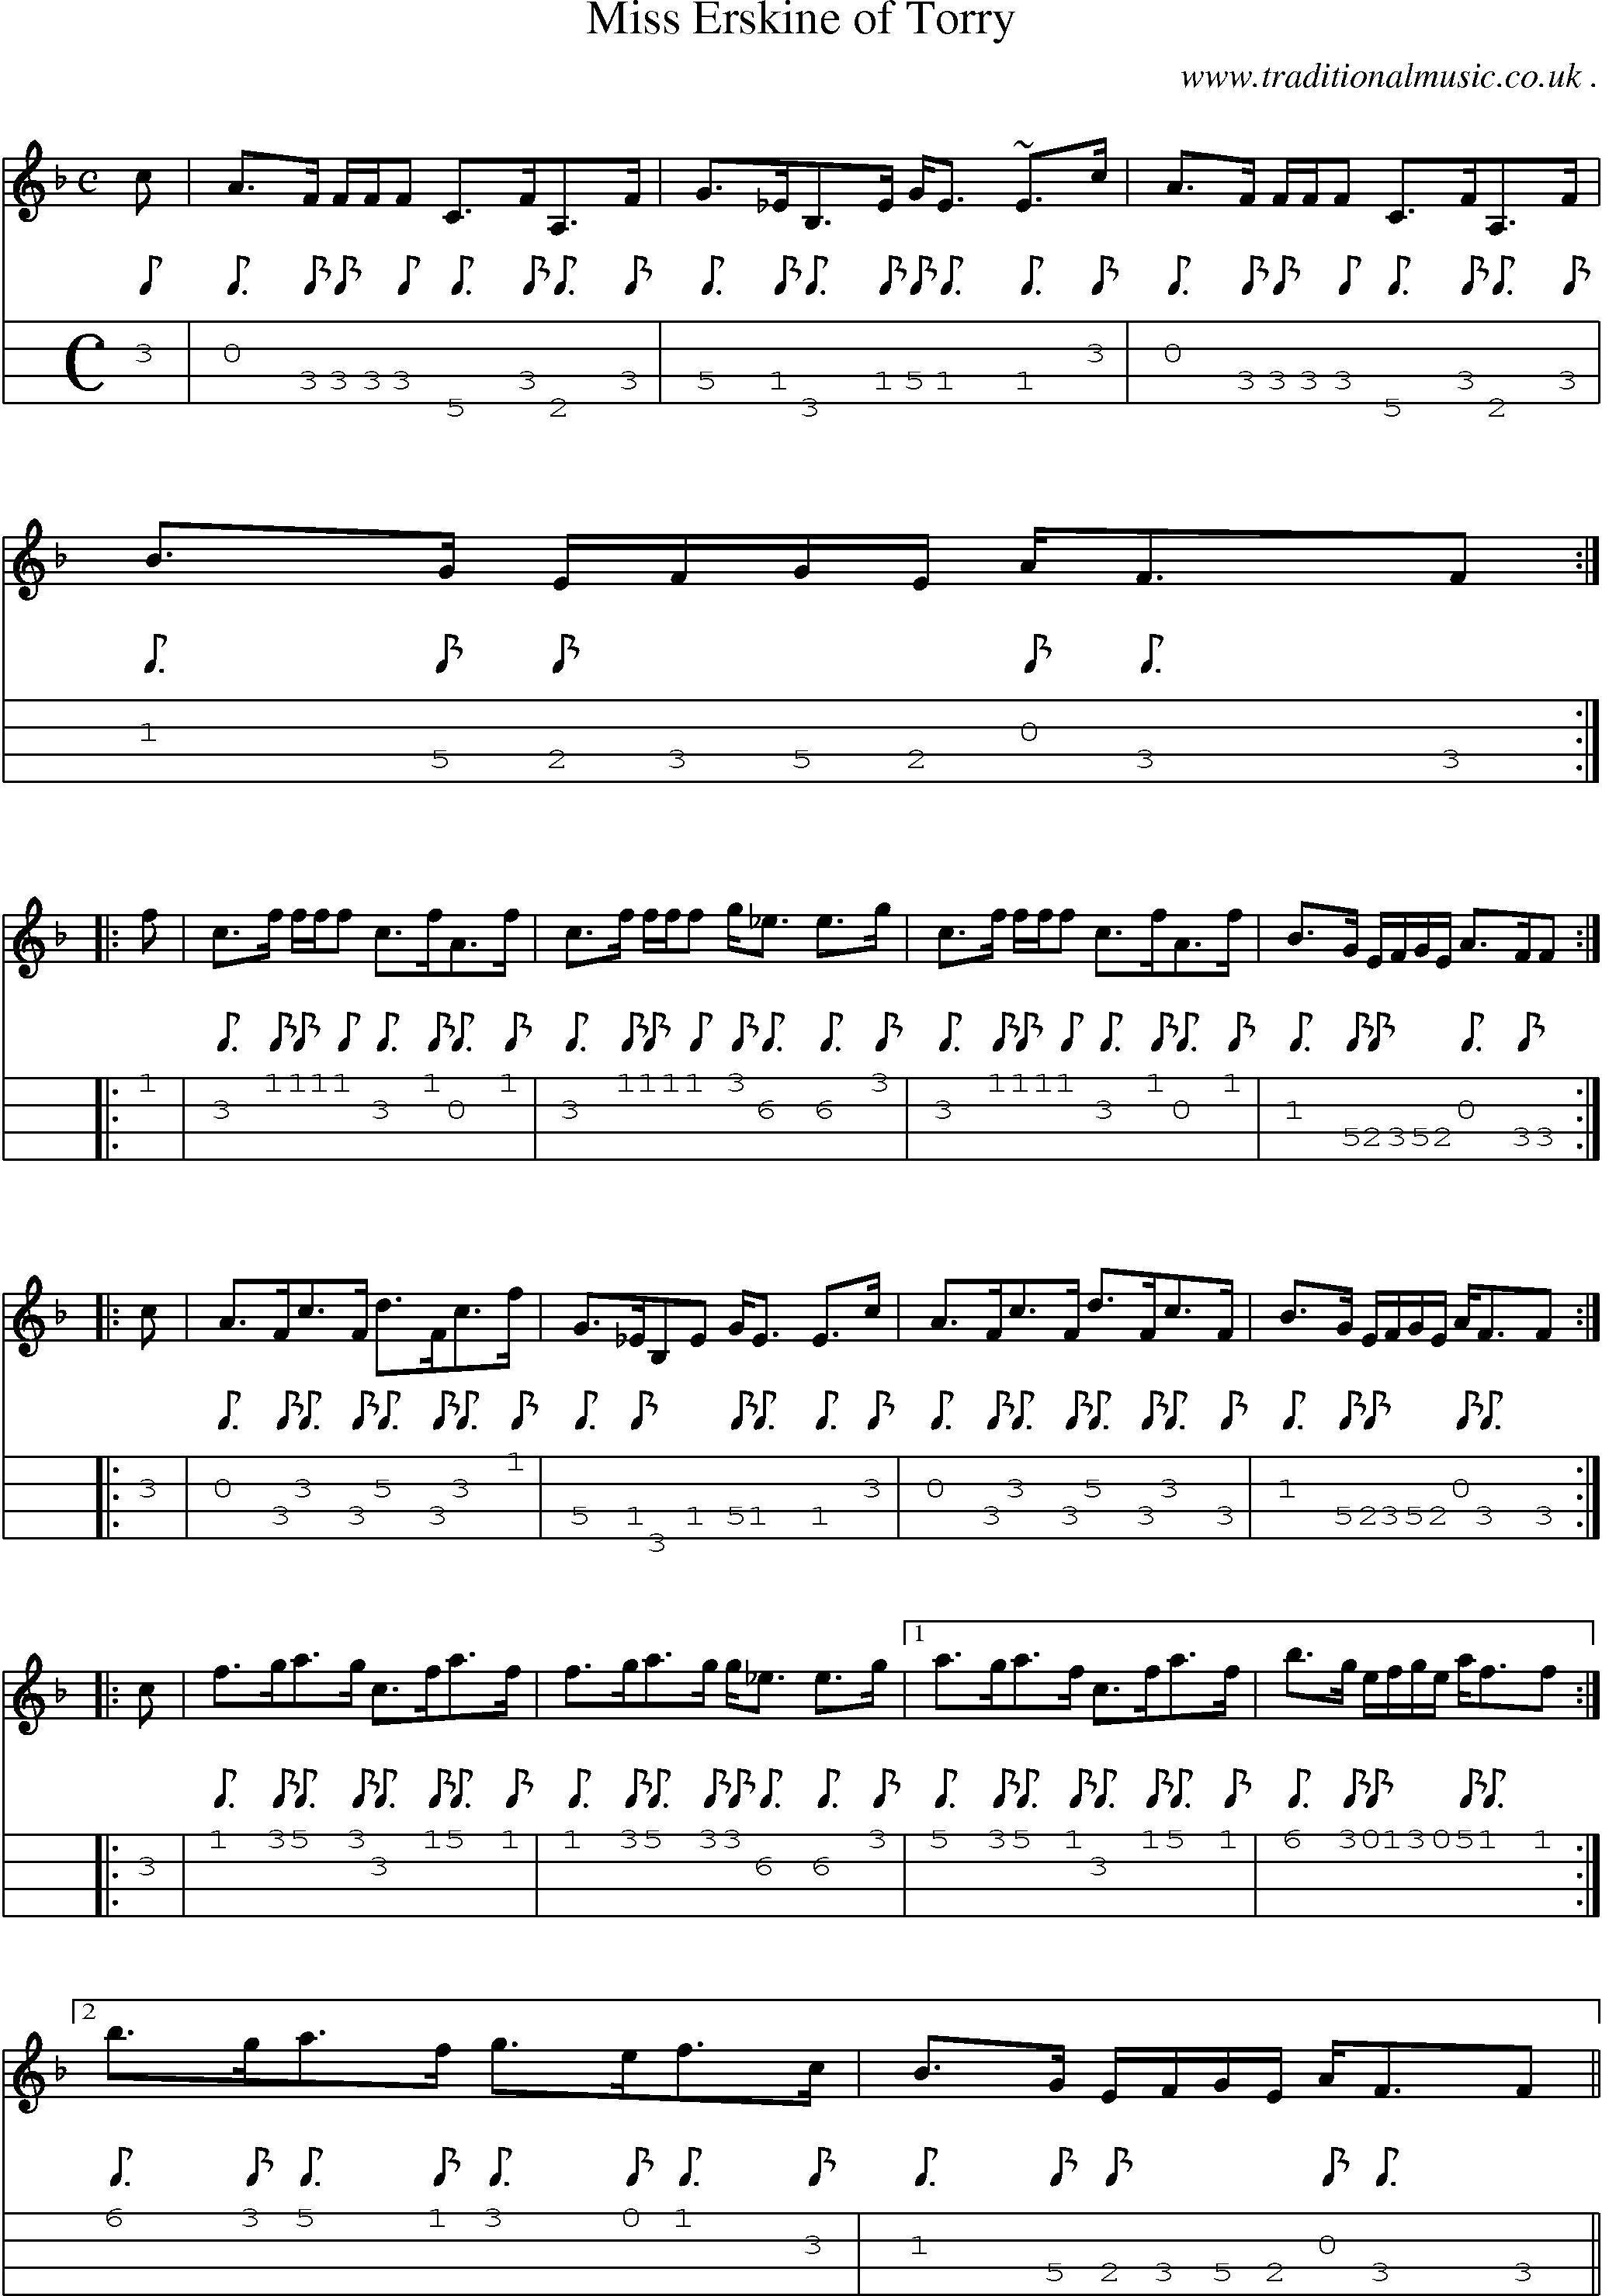 Sheet-music  score, Chords and Mandolin Tabs for Miss Erskine Of Torry 